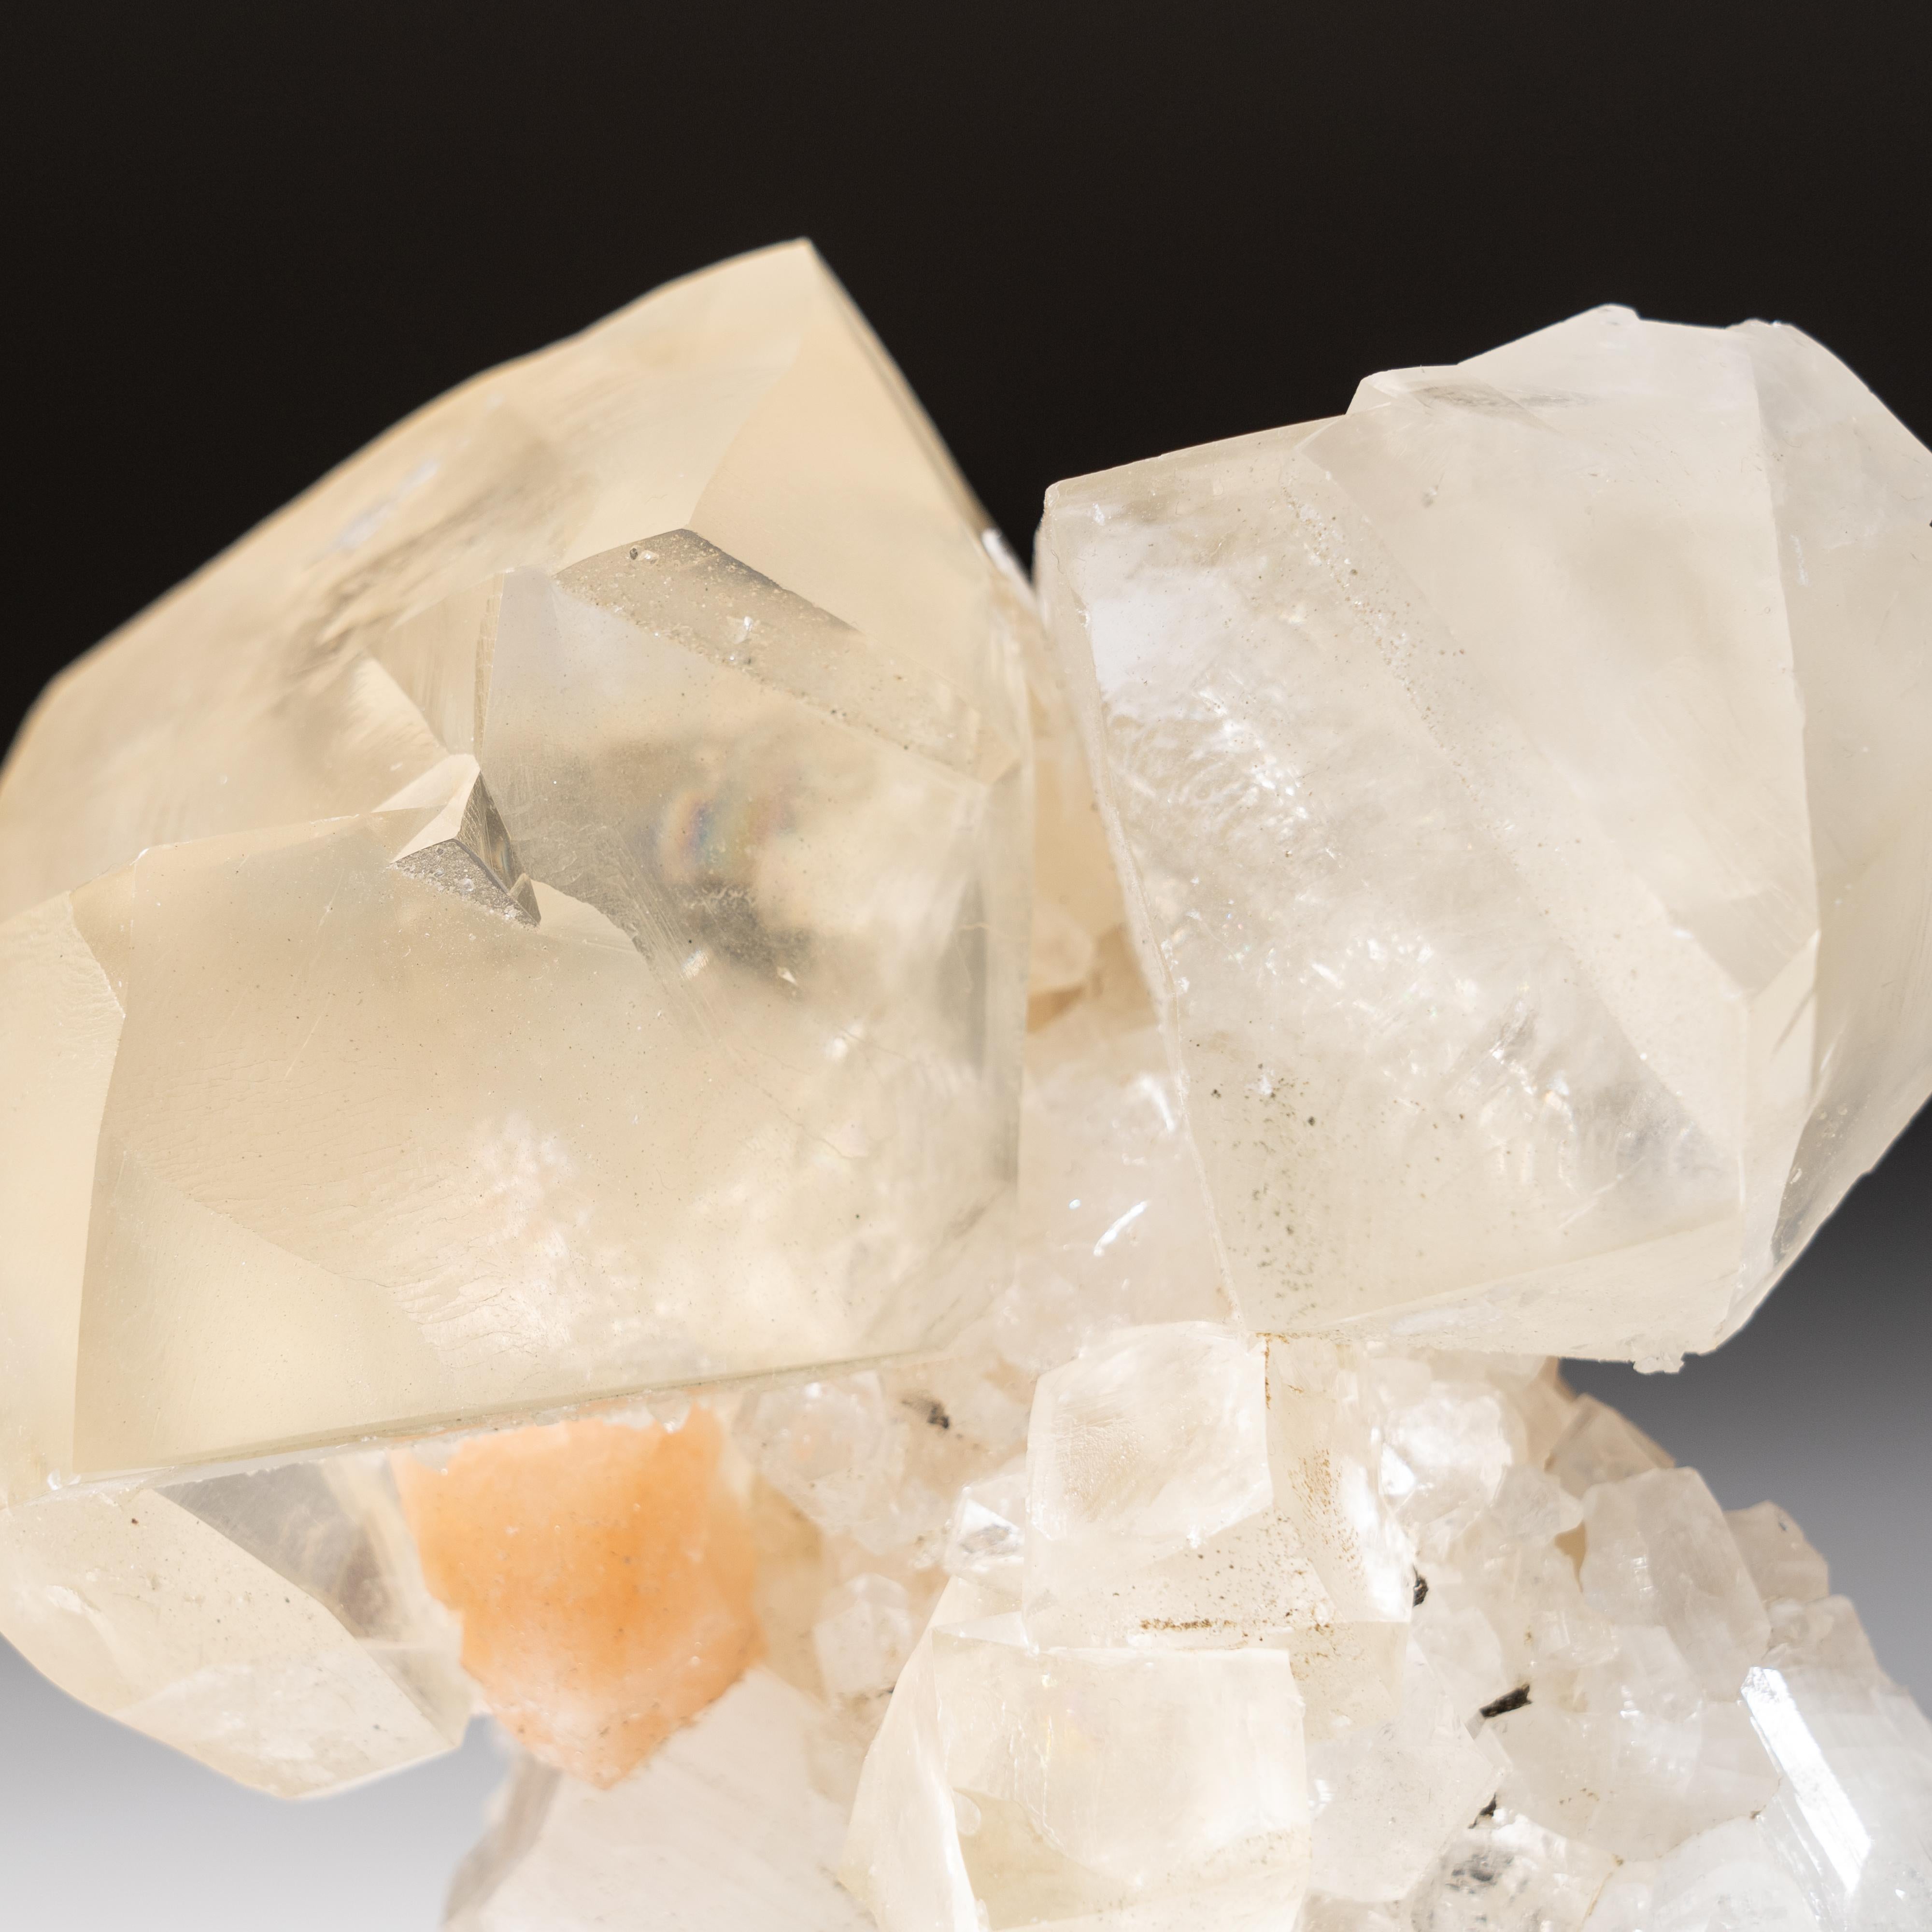 From Nasik District, Maharashtra, India

Large translucent double penetrating twinned crystals of calcite on translucent to transparent apophyllite crystal cluster matrix with pink stilbite in wheat sheave aggregates. The calcite has rich golden